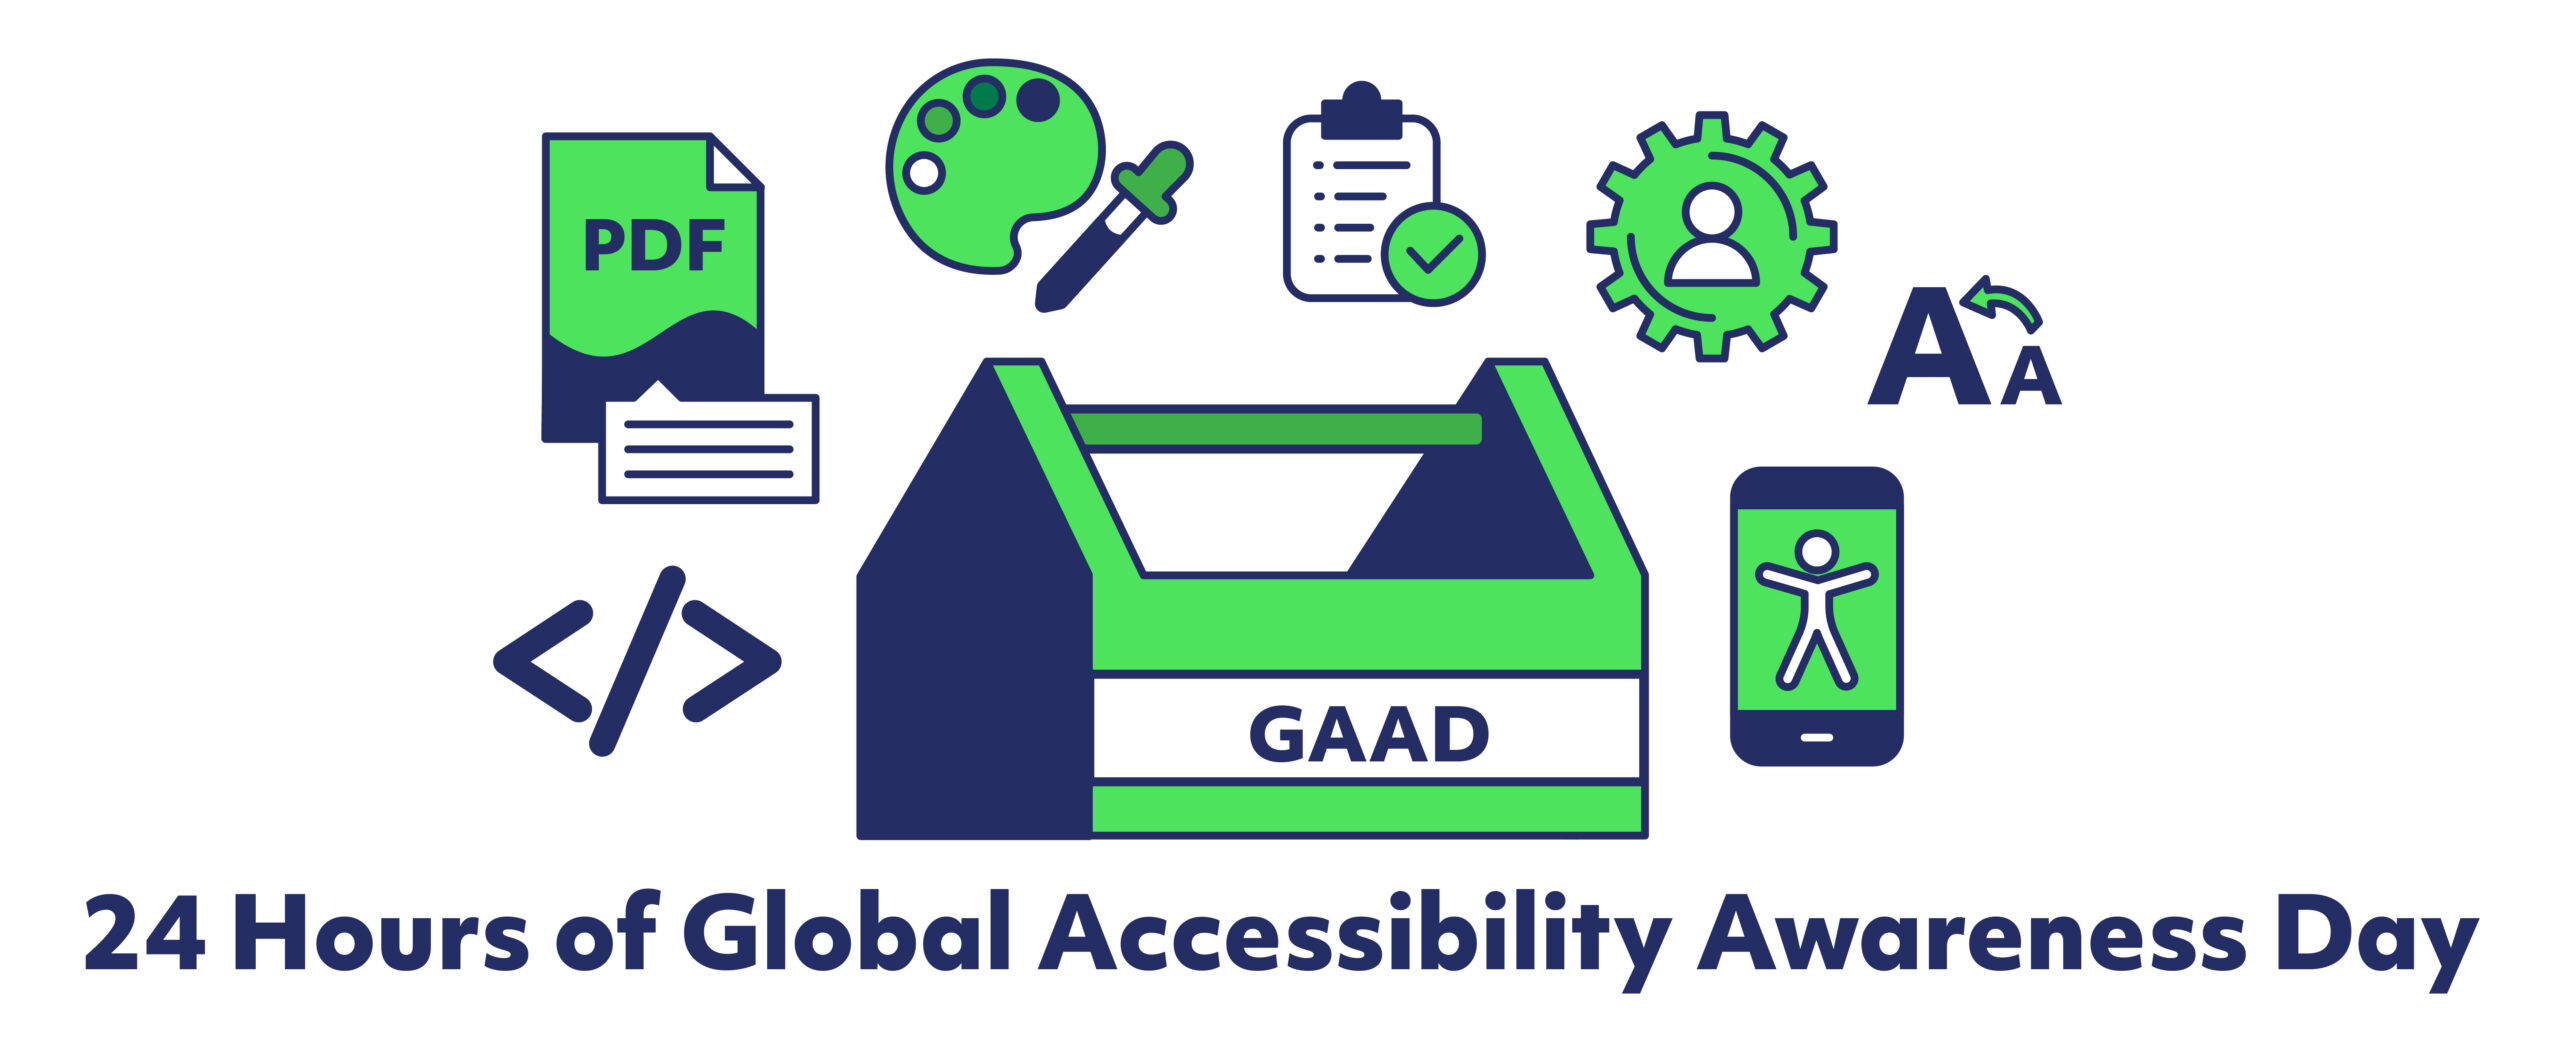 24 Hours of Global Accessibility Awareness Day: GAAD in a Box